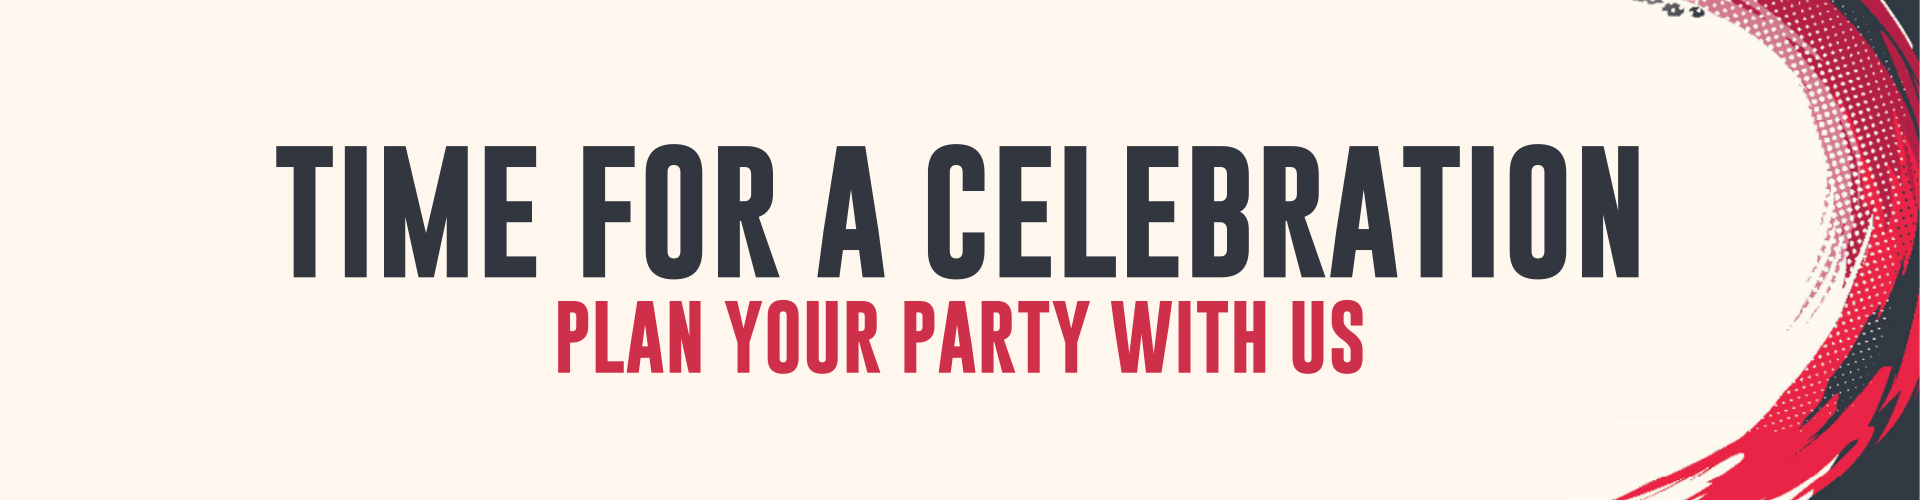 Time for a celebration - Plan your party with us